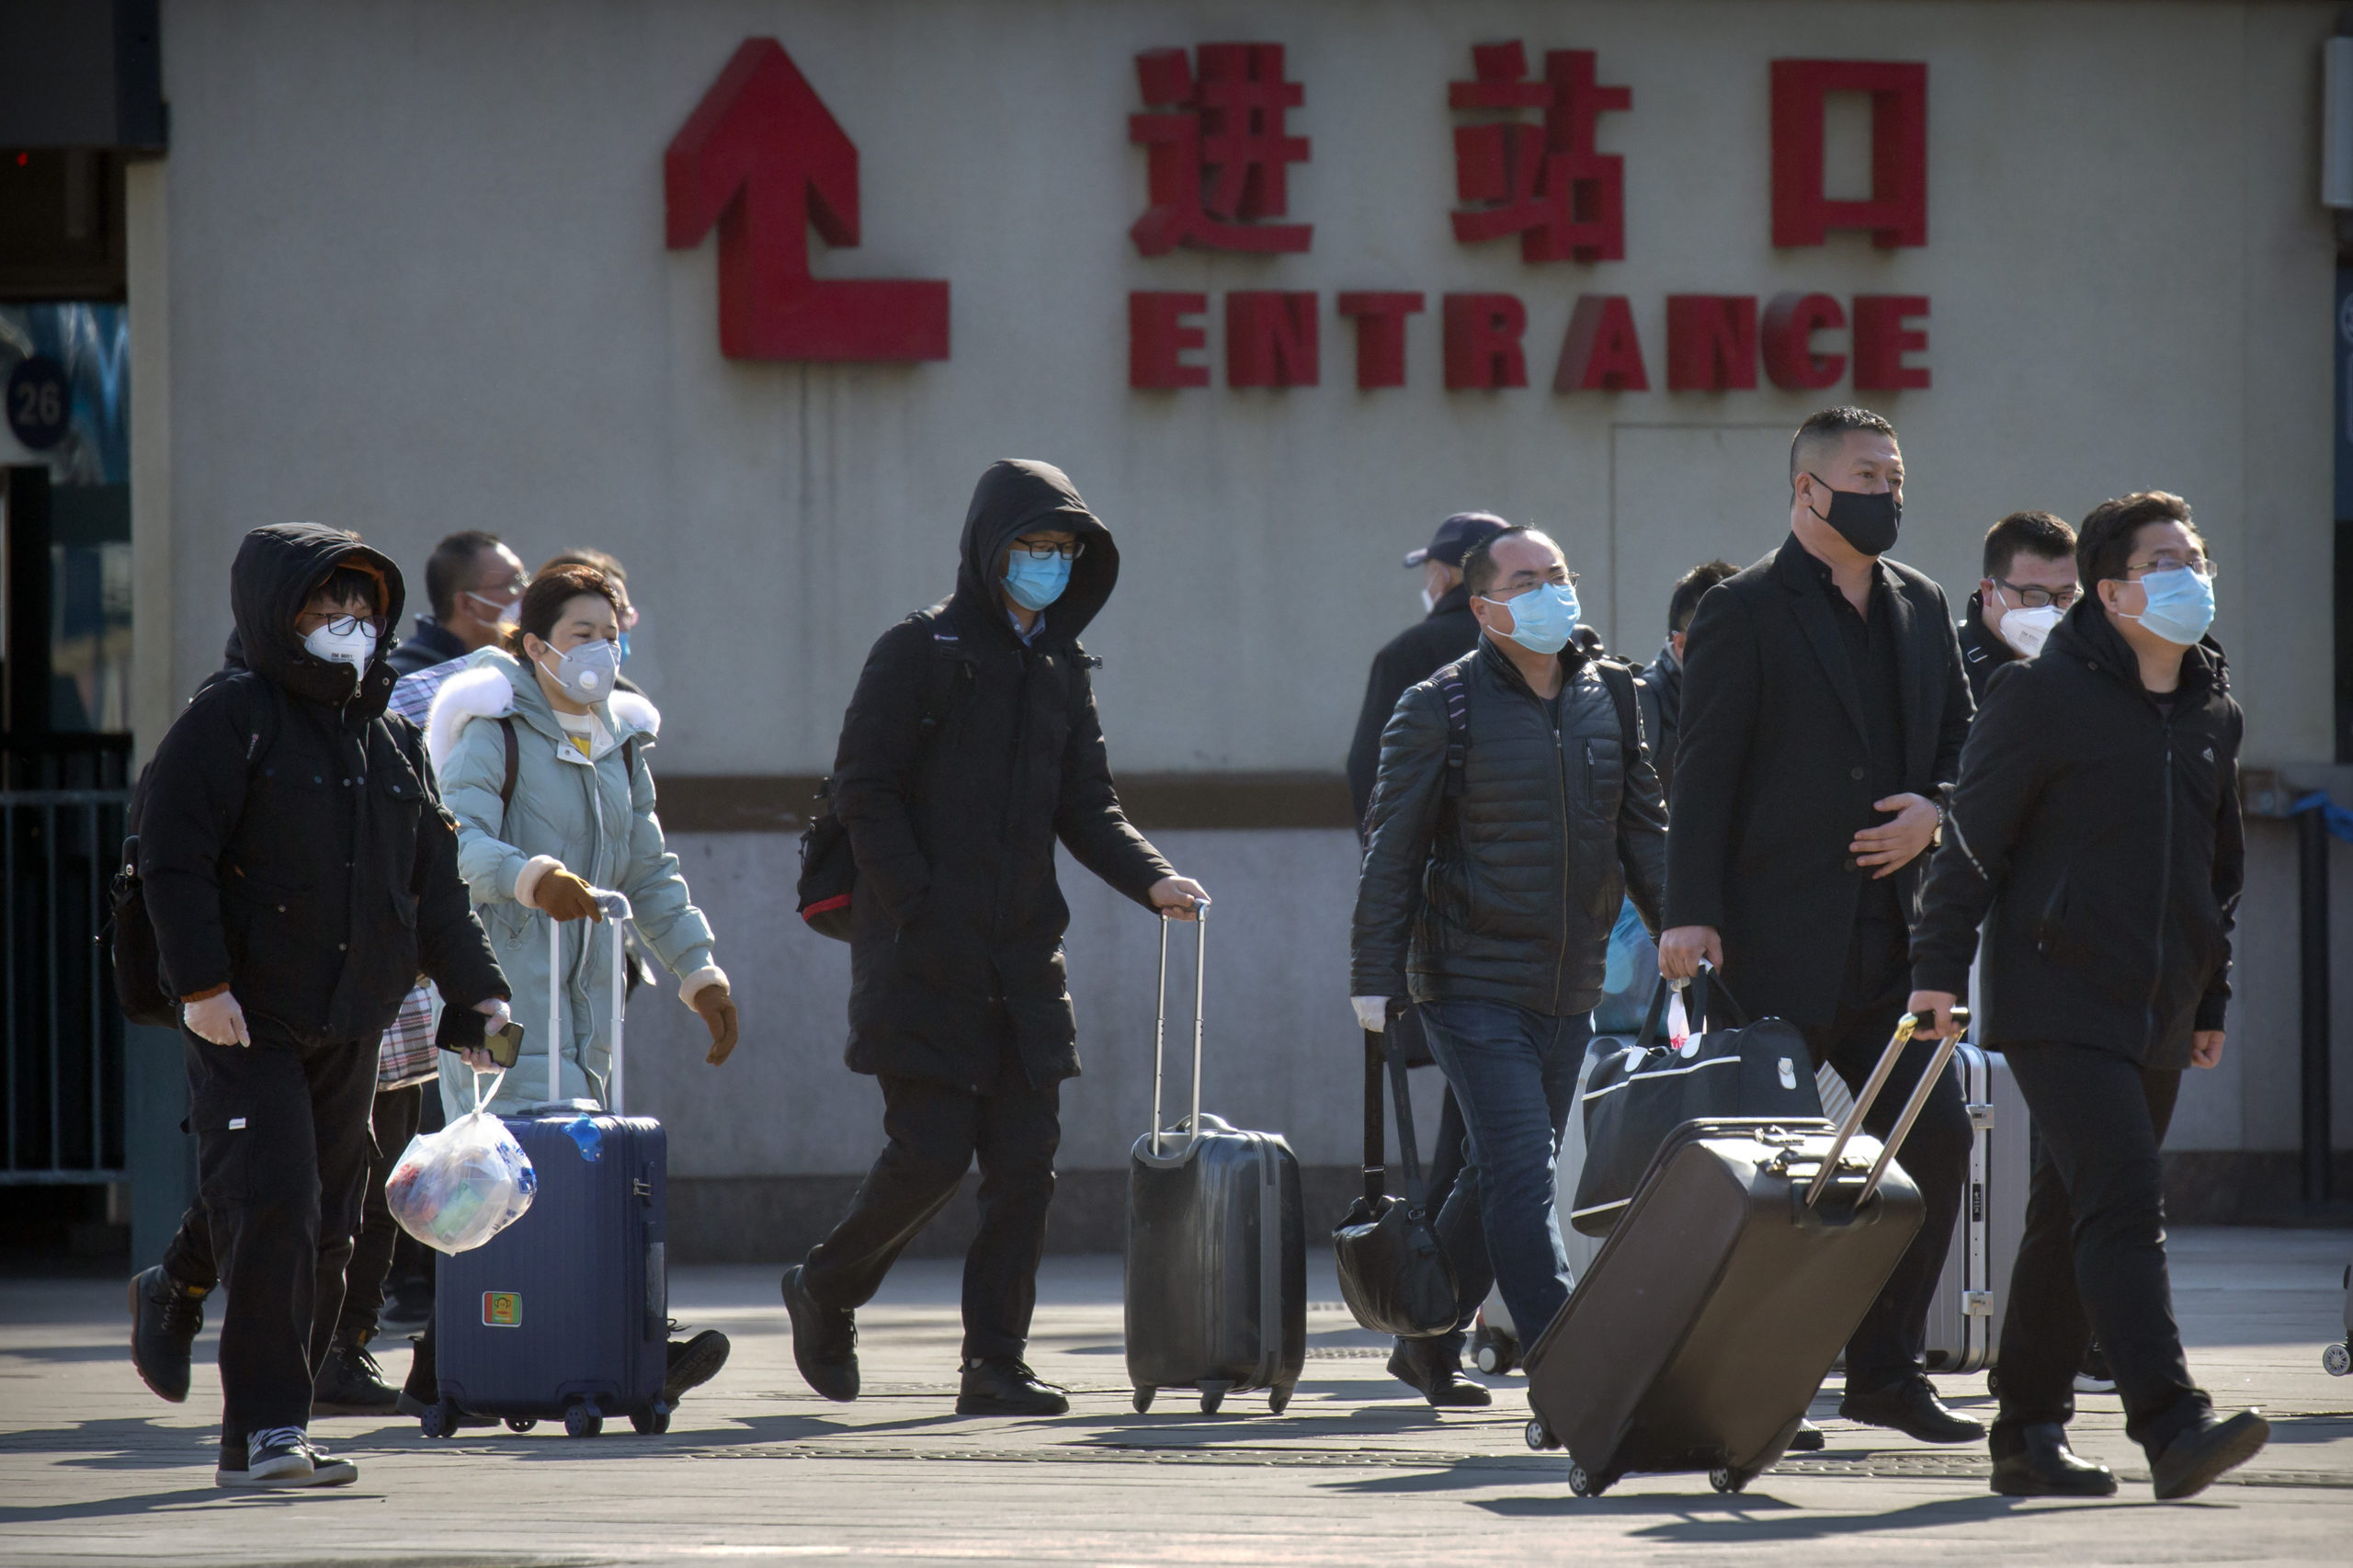 coronavirus covid 19 Travelers wear face masks as they walk outside the Beijing Railway Station in Beijing, Saturday, Feb. 15, 2020. People returning to Beijing will now have to isolate themselves either at home or in a concentrated area for medical observation, said a notice from the Chinese capital's prevention and control work group published by state media late Friday. (AP Photo/Mark Schiefelbein)